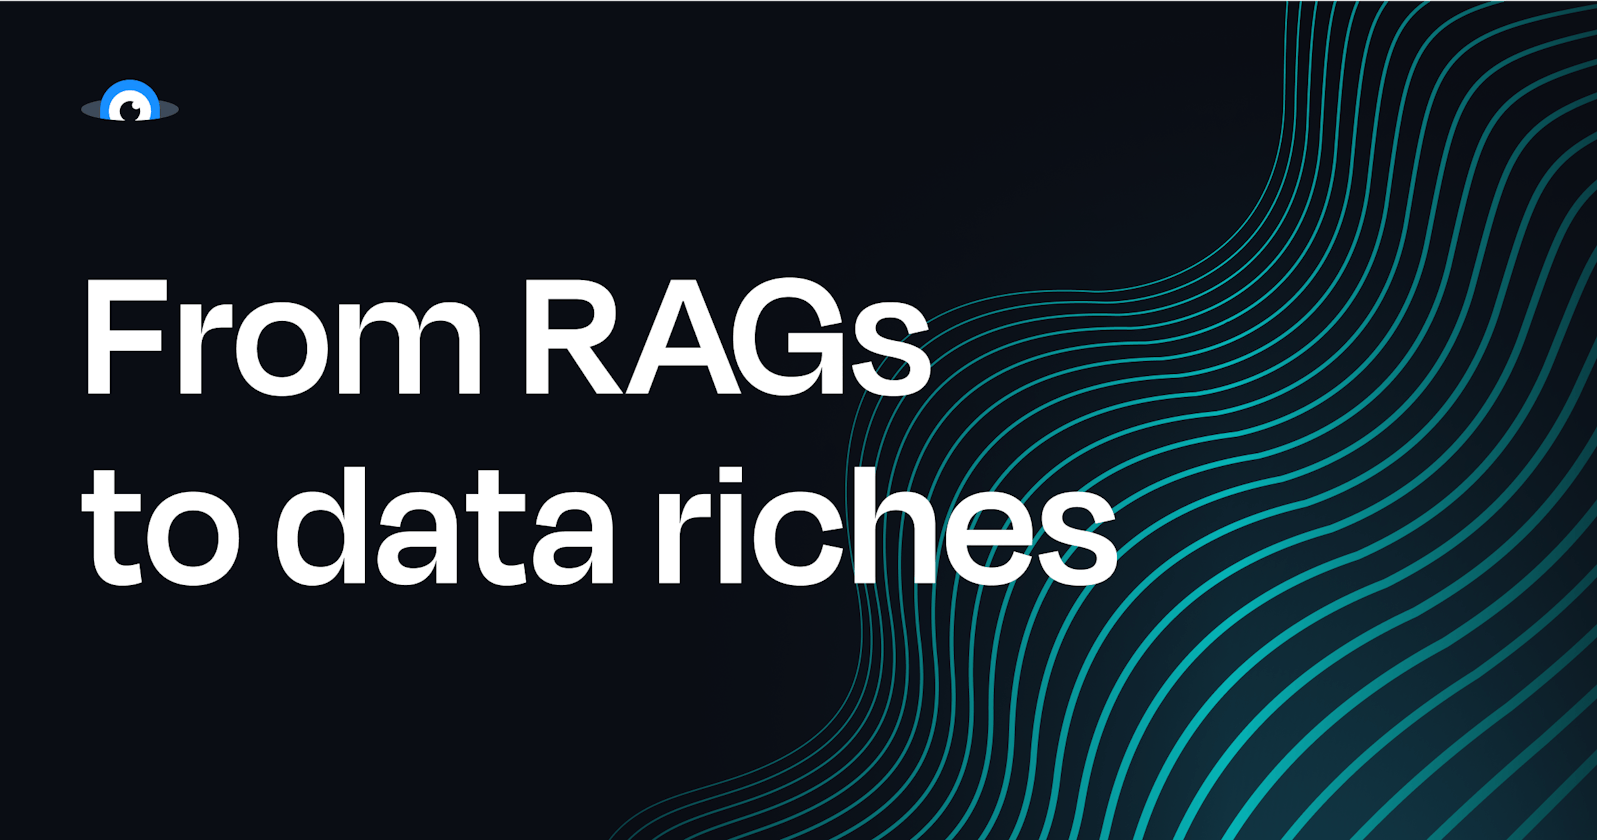 From RAGs to data riches: how Squid Cloud implements Retrieval Augmented Generation for any data source